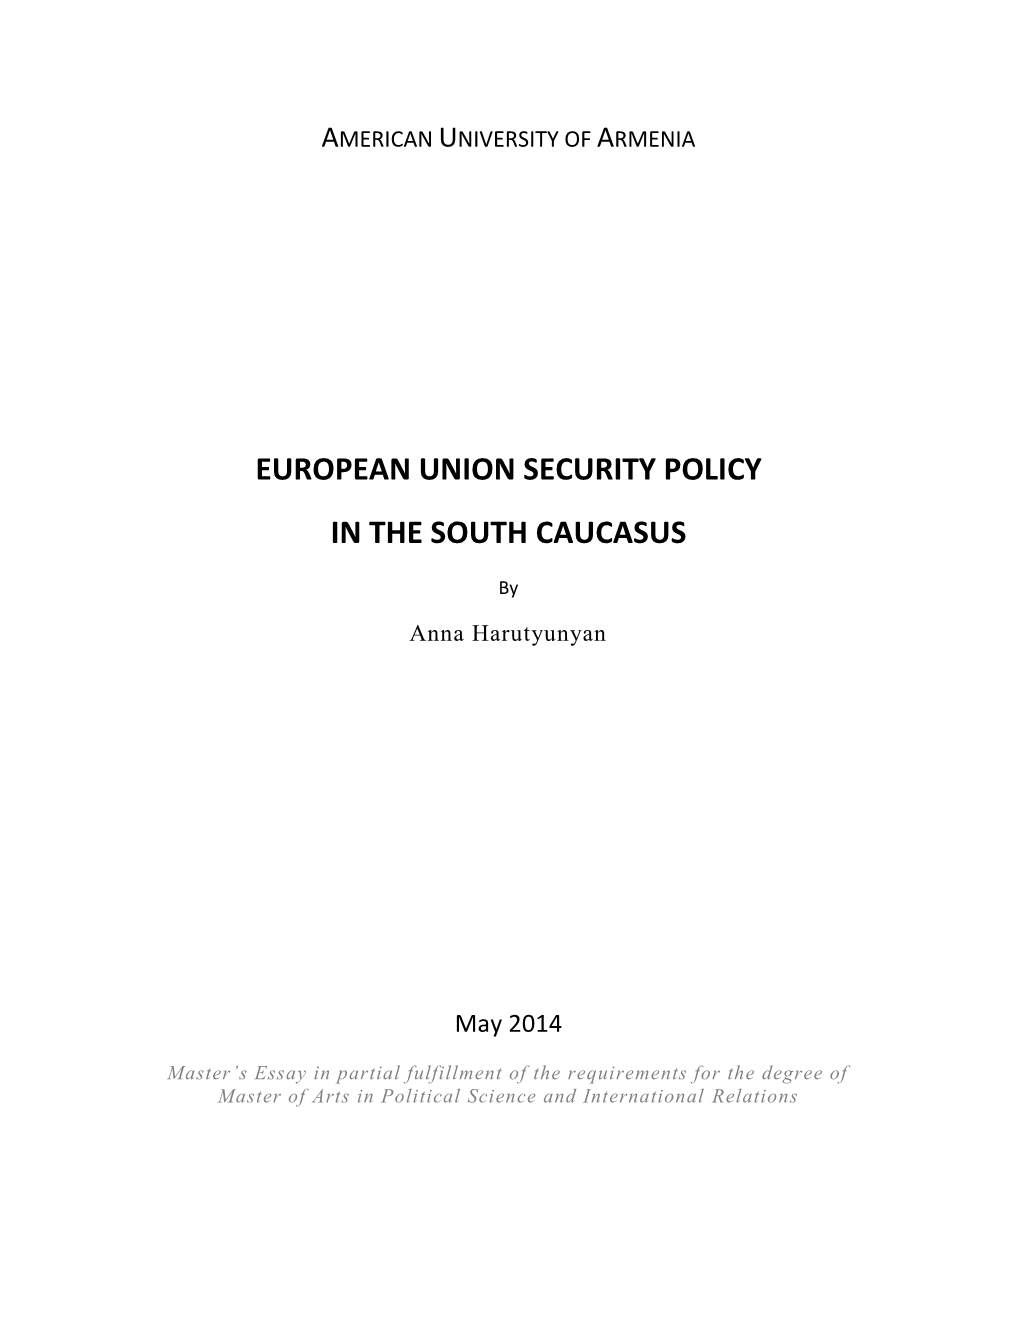 European Union Security Policy in the South Caucasus